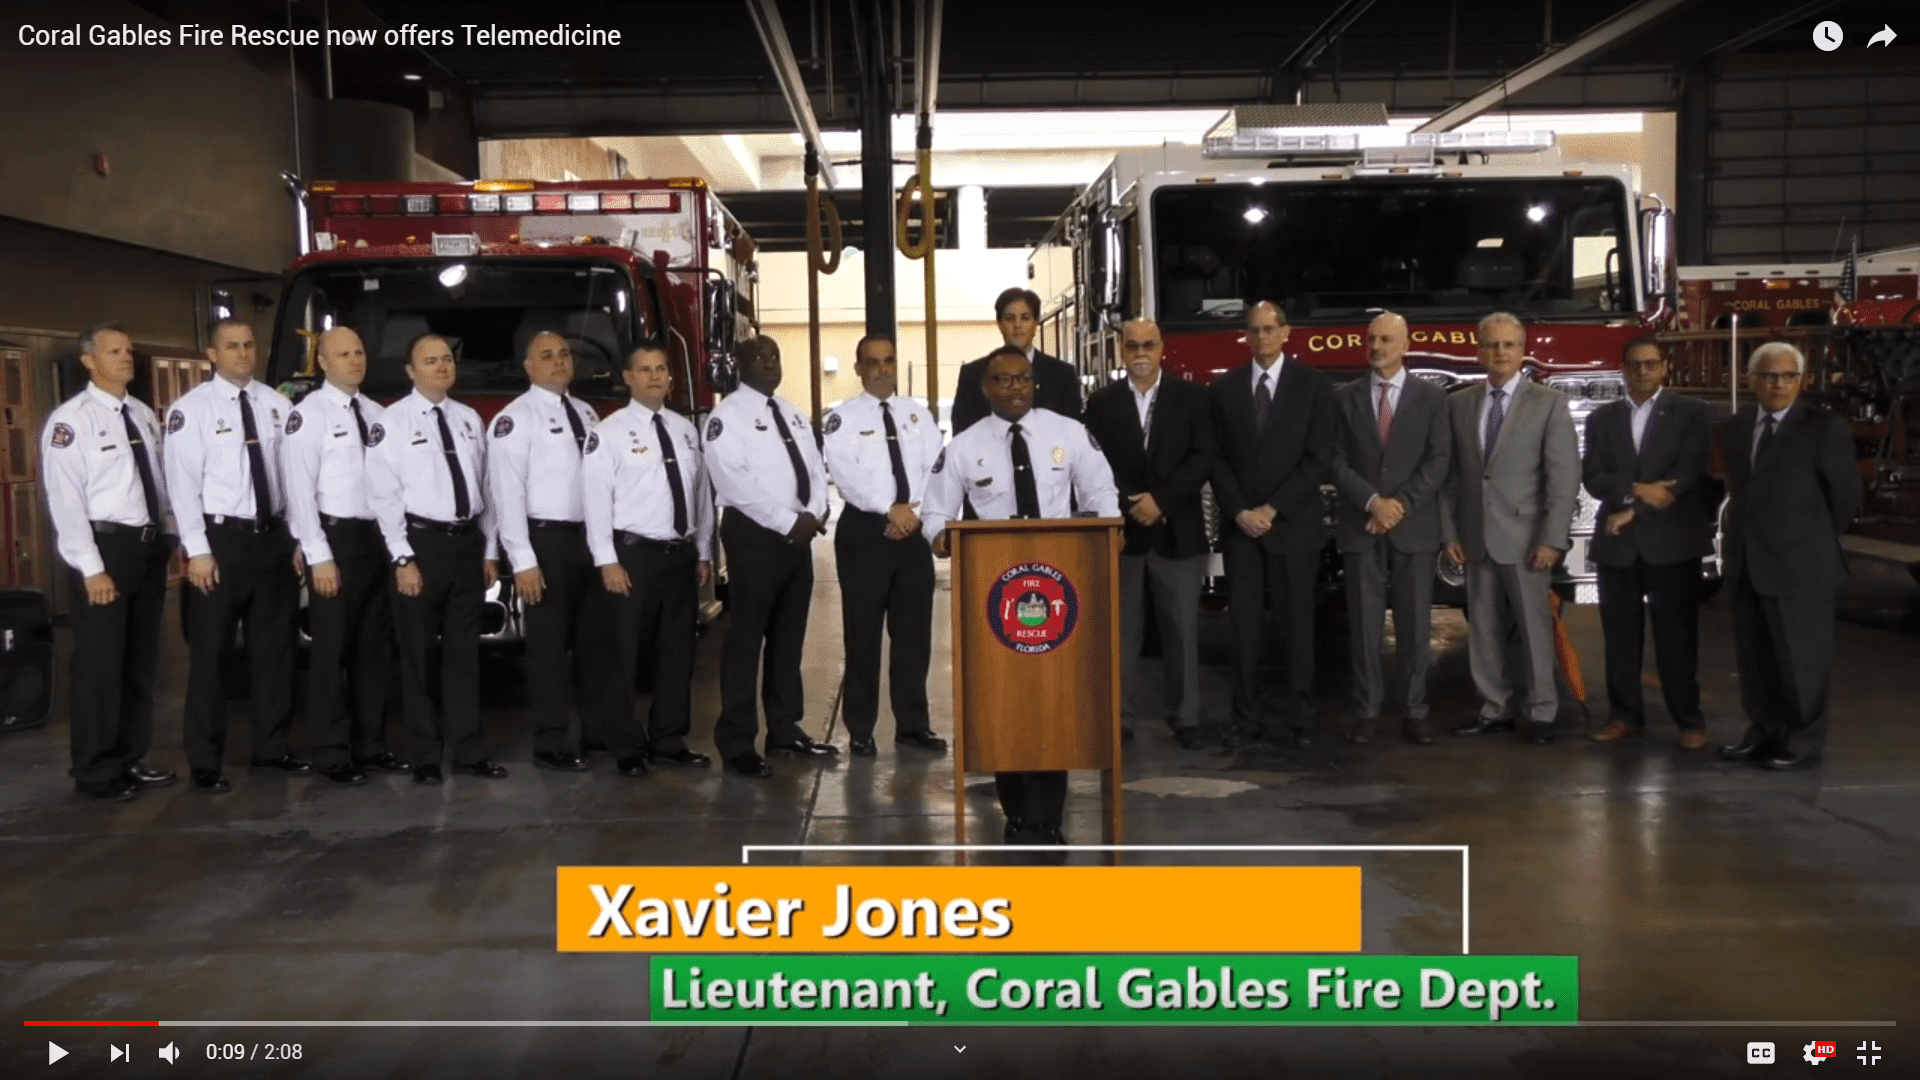 The Gordon Center to Partner with Coral Gables Fire Department